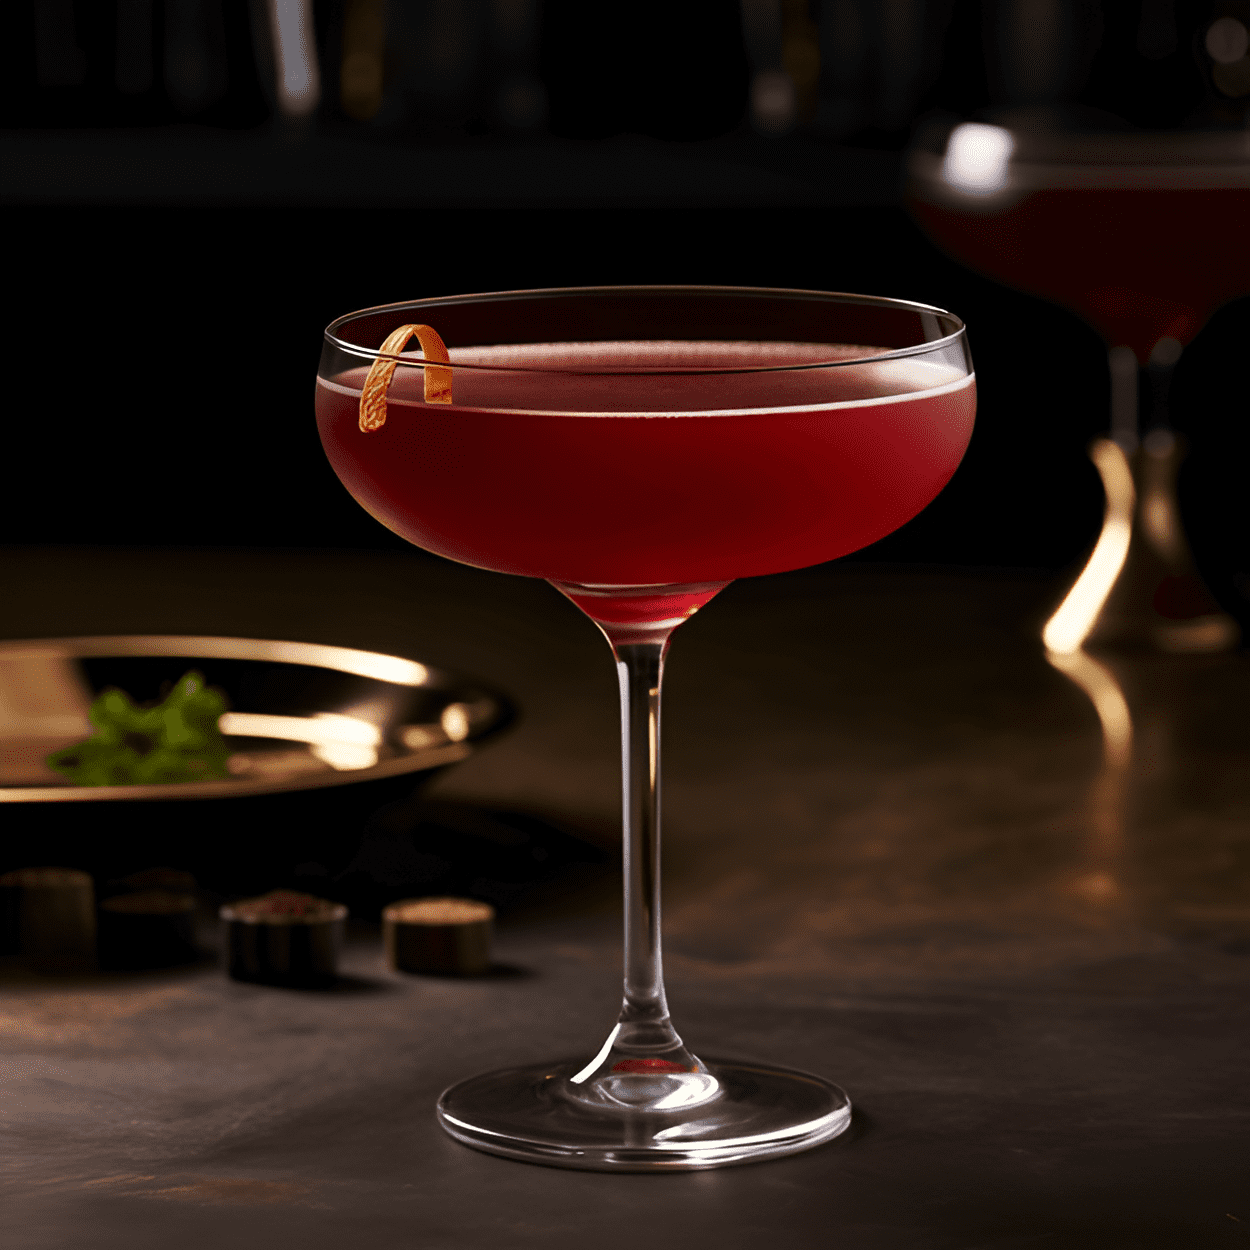 Porto Flip Cocktail Recipe - The Porto Flip is a rich, velvety, and slightly sweet cocktail with a hint of nuttiness. The flavors of the port wine and brandy blend beautifully, while the egg adds a creamy texture. The cocktail is well-balanced, with a warming finish.